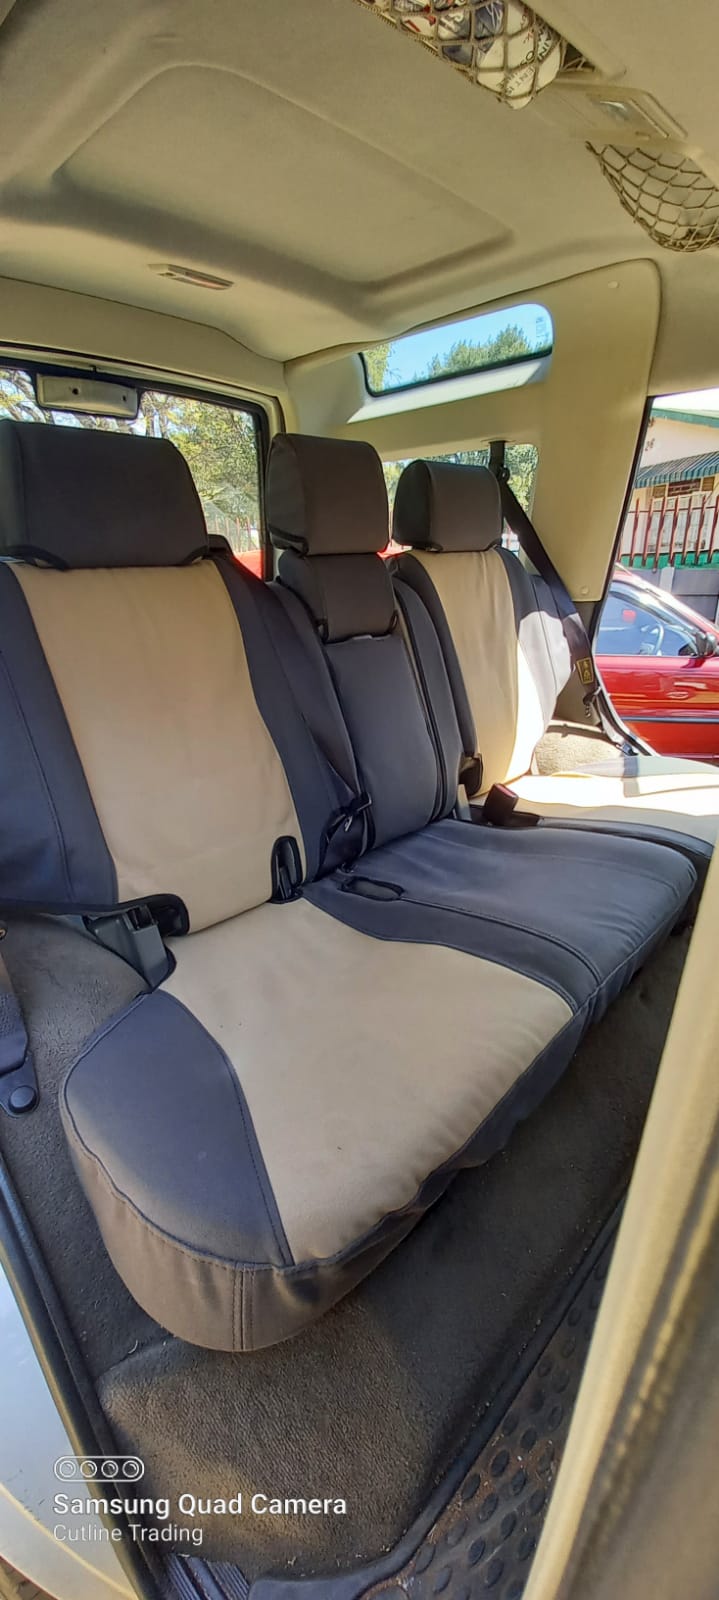 Land Rover Discovery 2 Seat covers